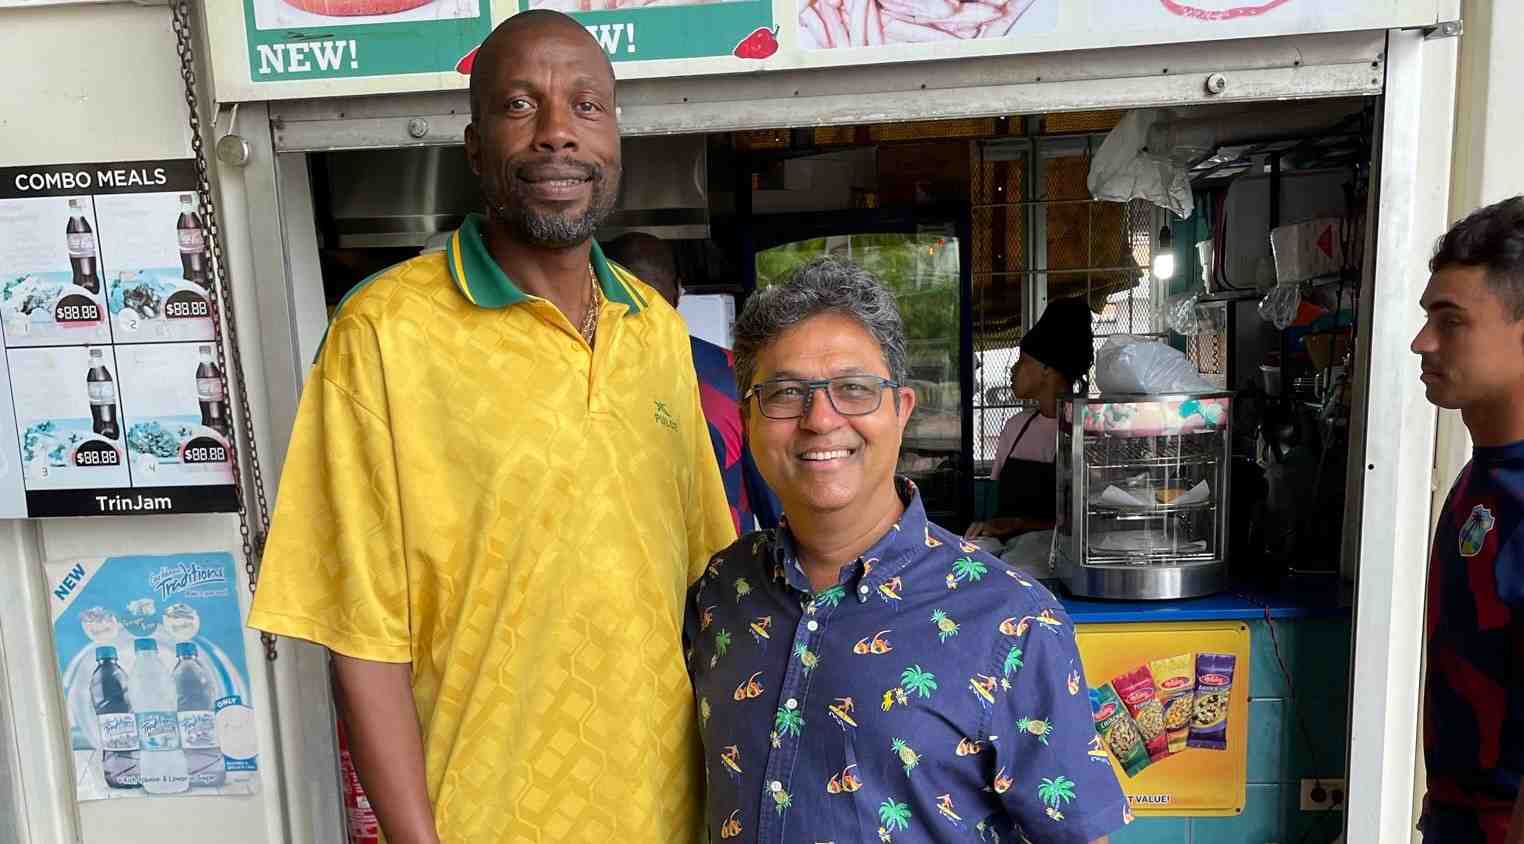 Shami and Bumrah best among fast bowlers, says Sir Curtly Ambrose